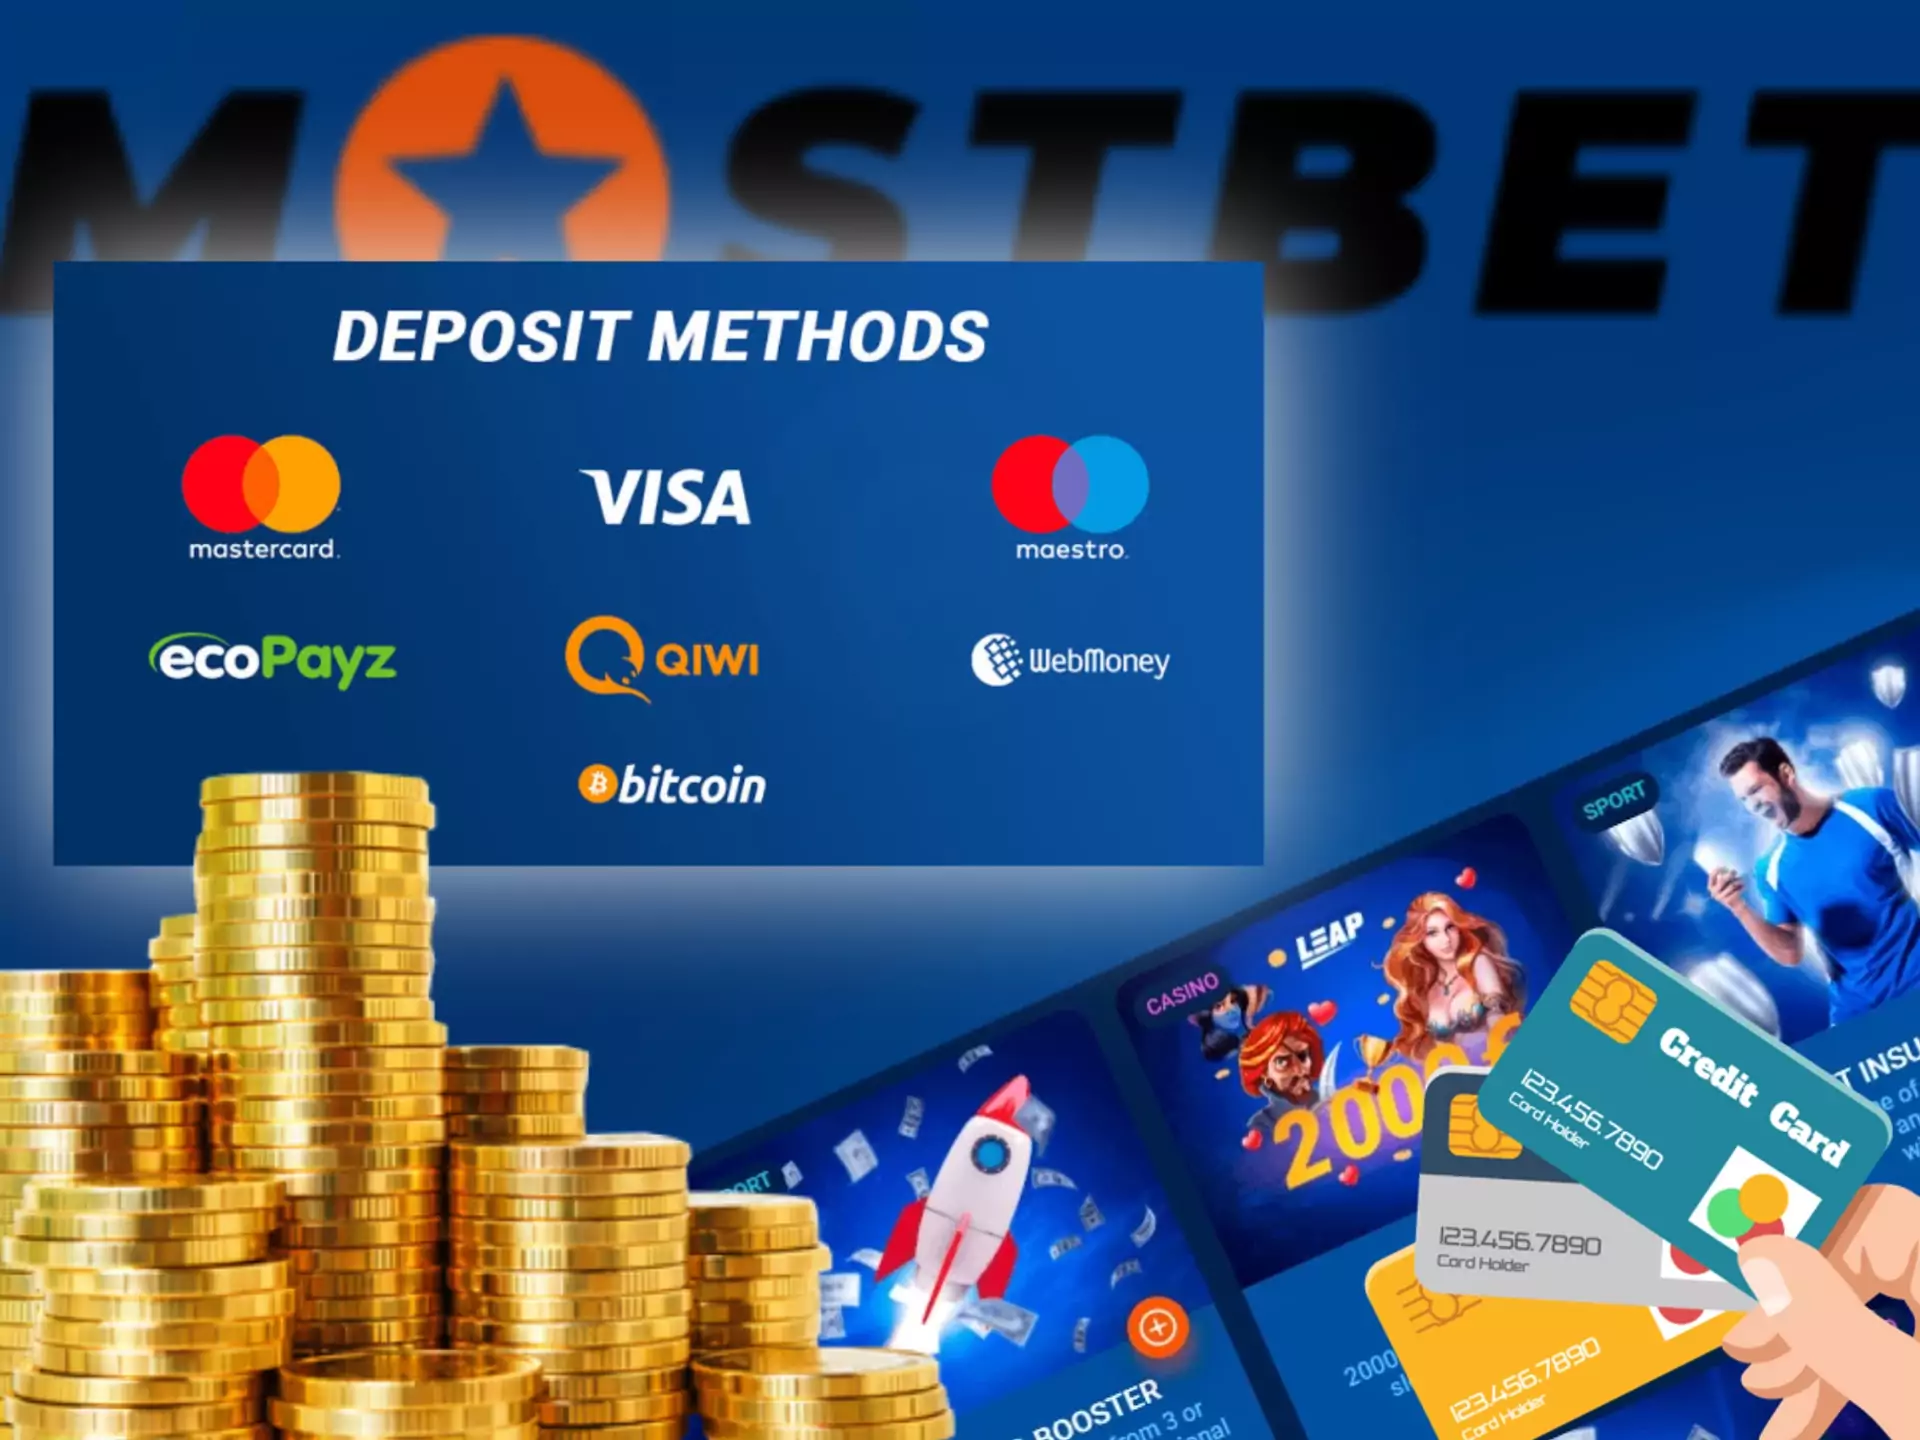 You can use ecoPayz, Paytm, Neteller or Neteller for depositing at Mostbet.